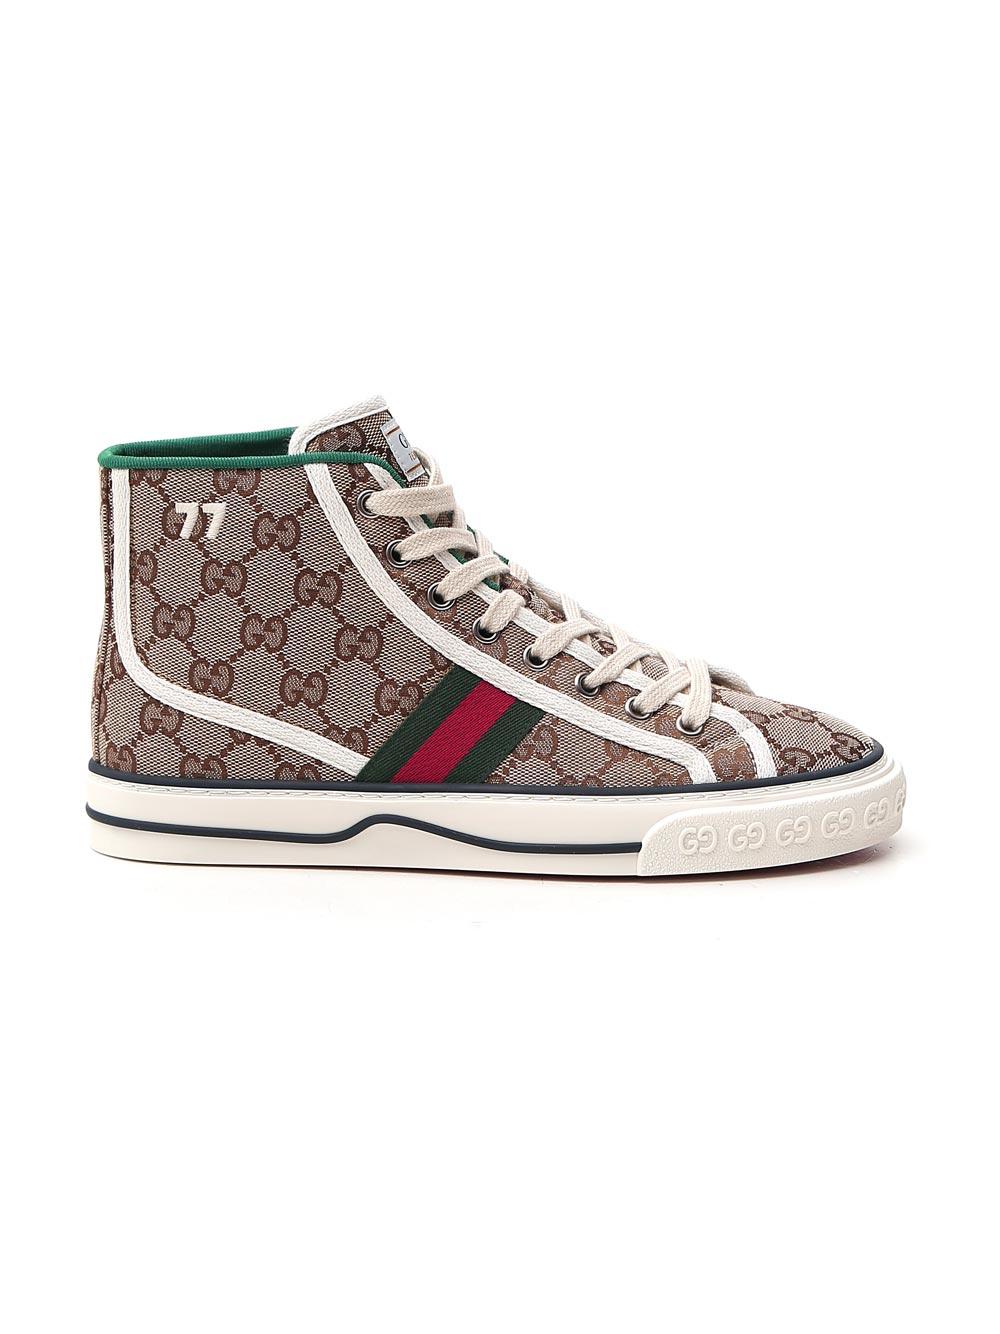 Gucci Canvas Tennis 1977 High Top Sneakers - Lyst